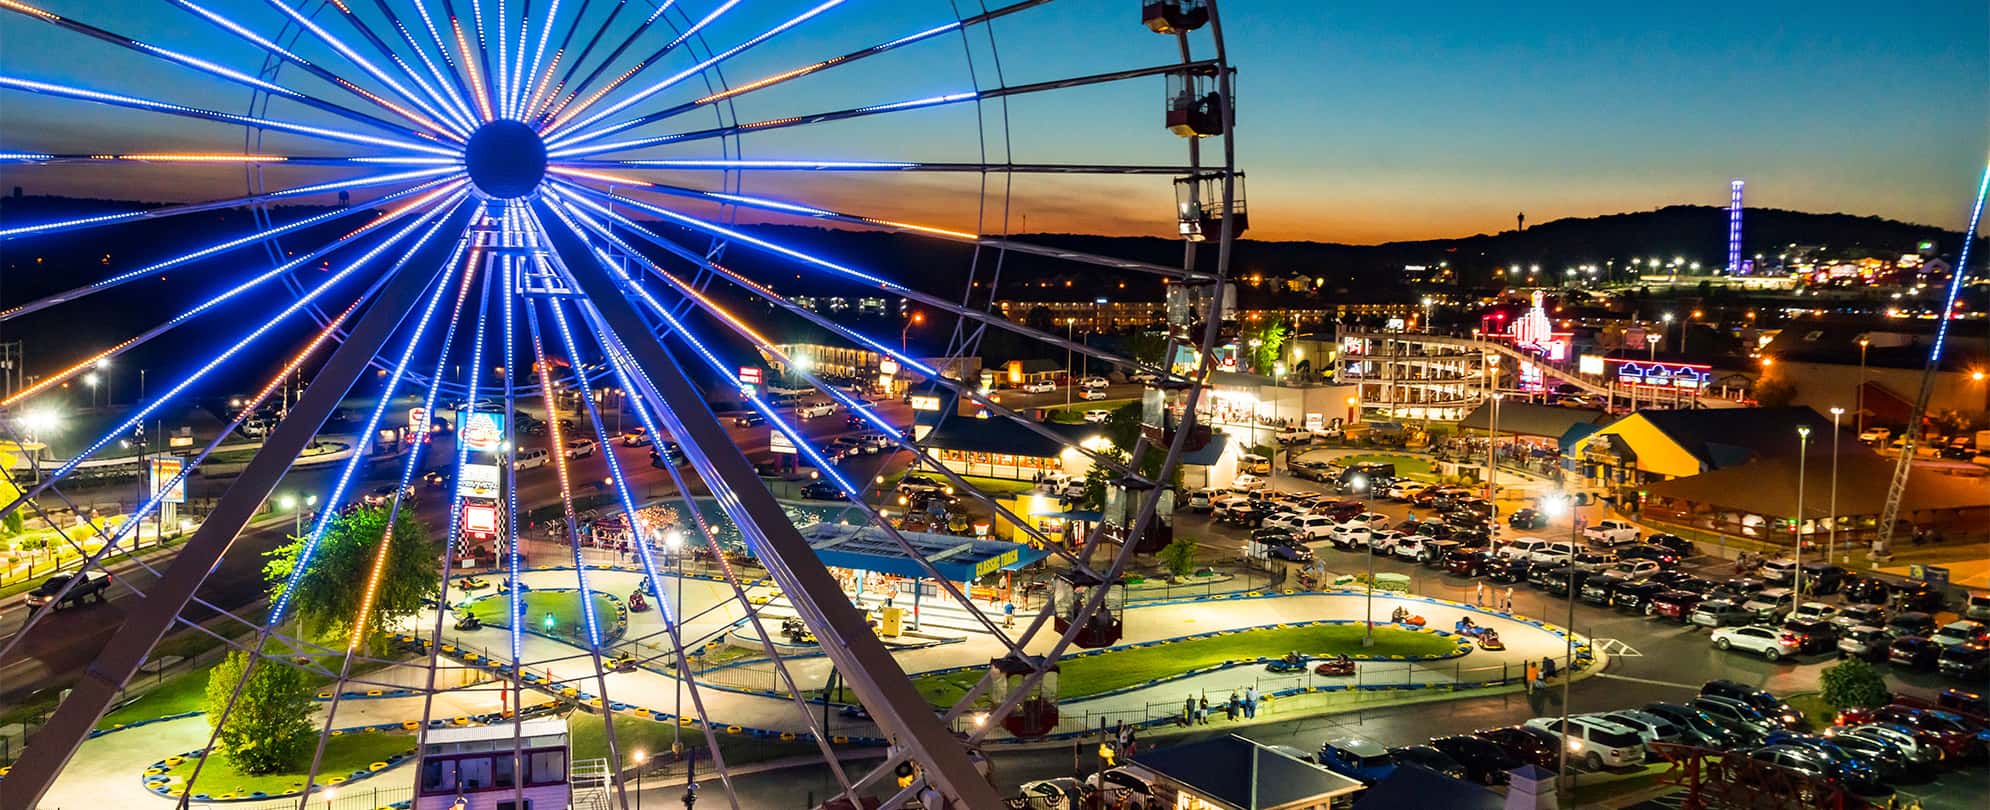 A ferris wheel with the city of Branson, Missouri lit up in the distance.